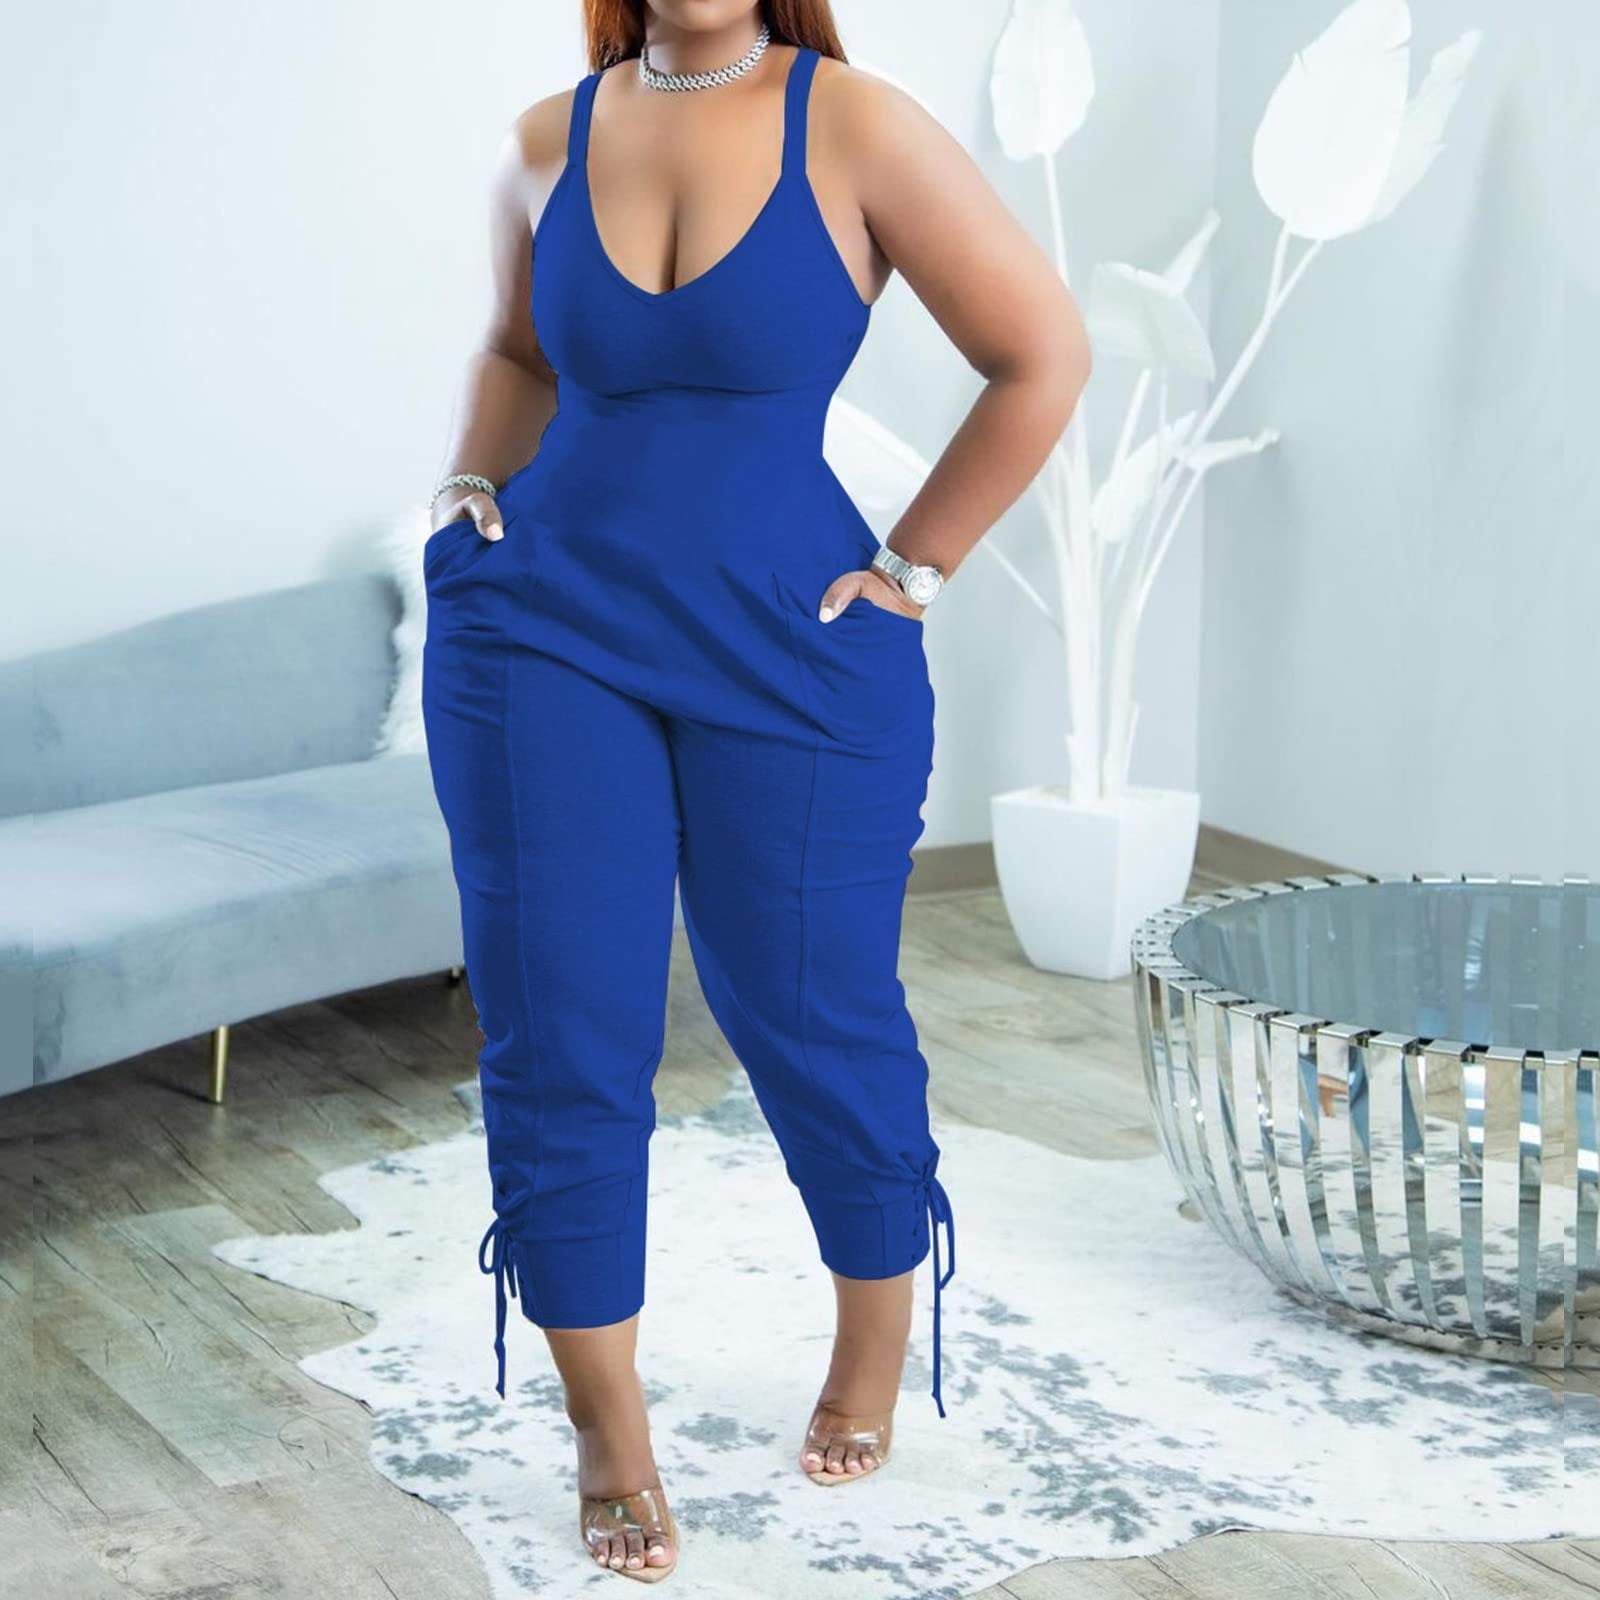 Xysaqa Plus Size Jumpsuit for Curvy Women, Womens Casual Bodycon Tank  One-Piece Jumpsuits Spaghetti Strap Sleeveless Fit Rompers Playsuit with  Pockets 